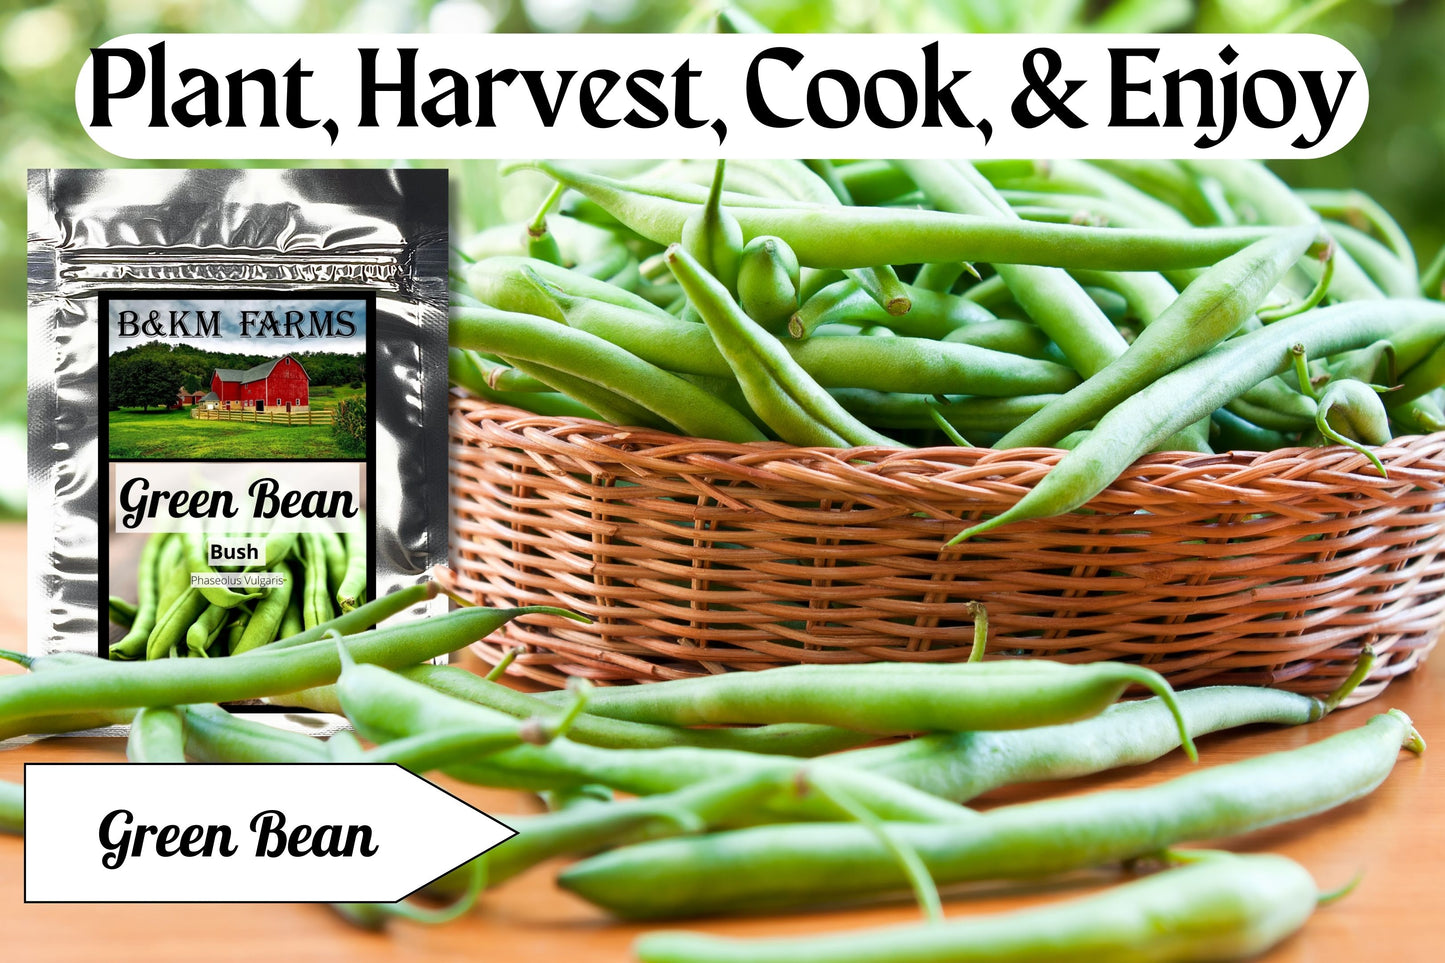 Green Beans Contender: Speedy Snaps, Straight from Your Garden